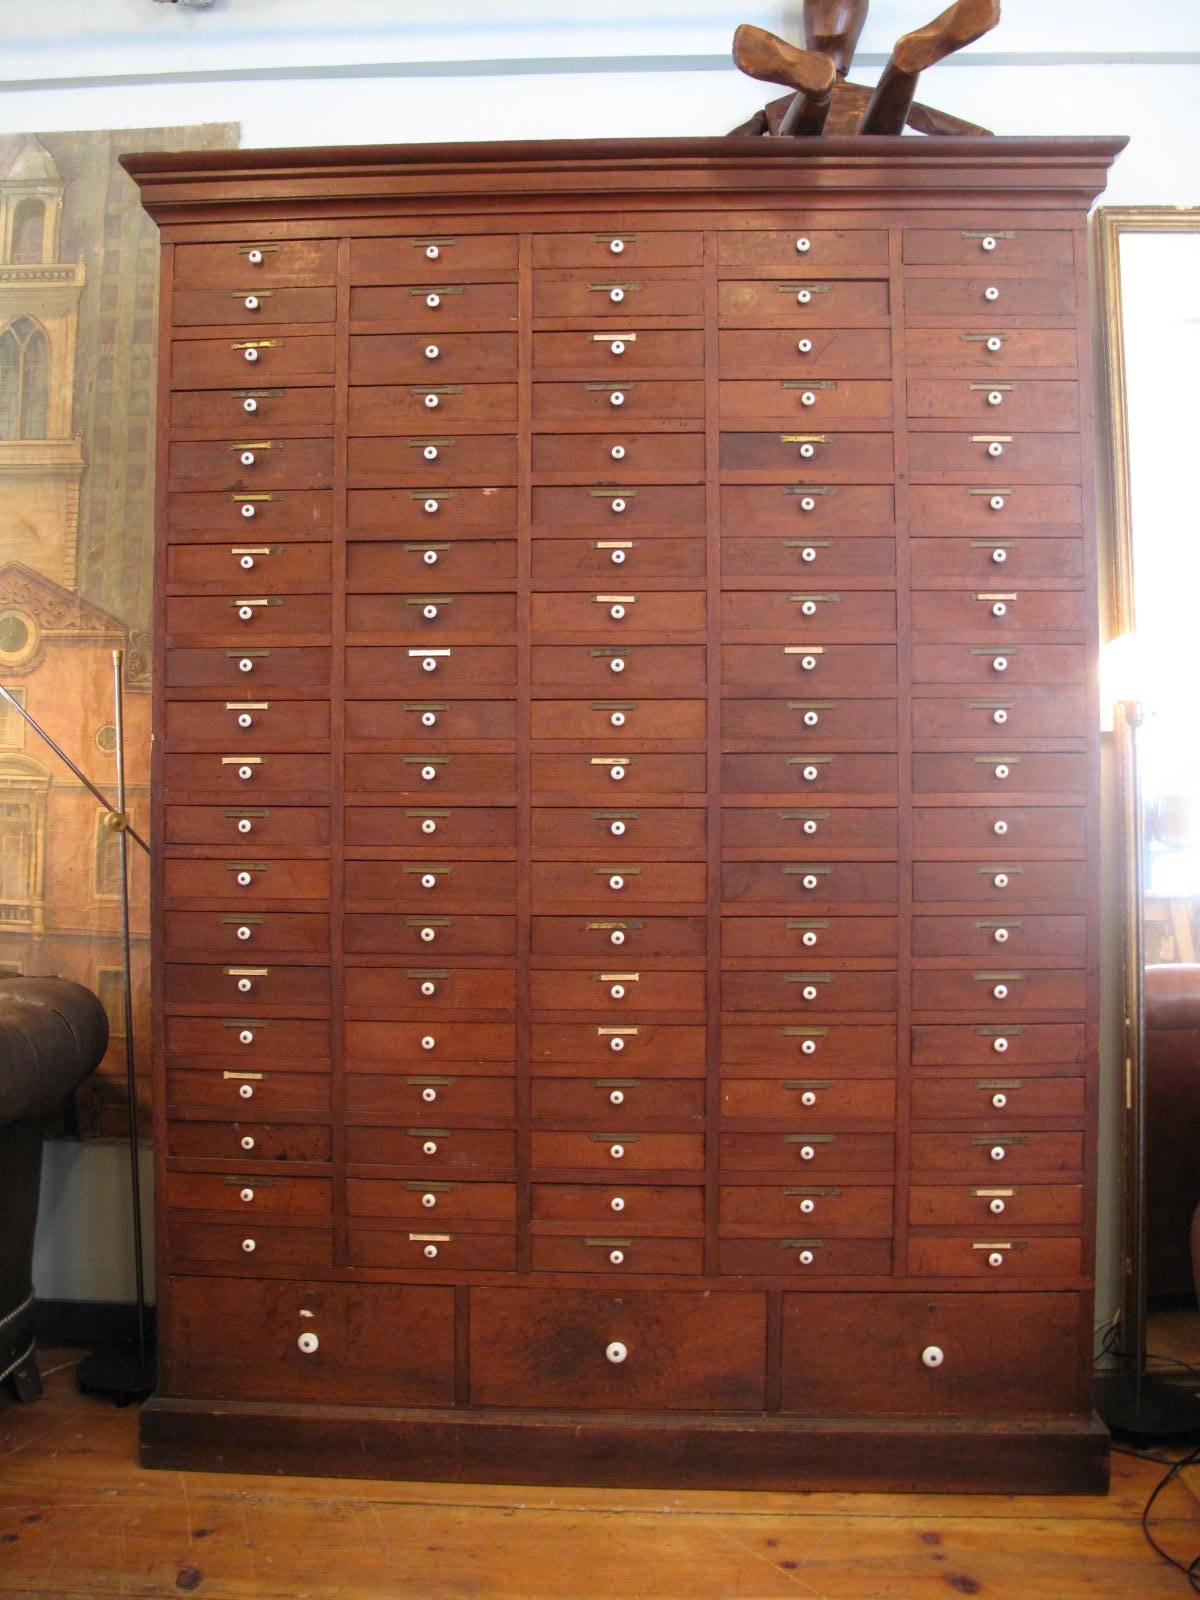 Late 19th century apothecary cabinet with original brass label holders and porcelain pulls. Having three larger lower drawers and 100 small drawers.